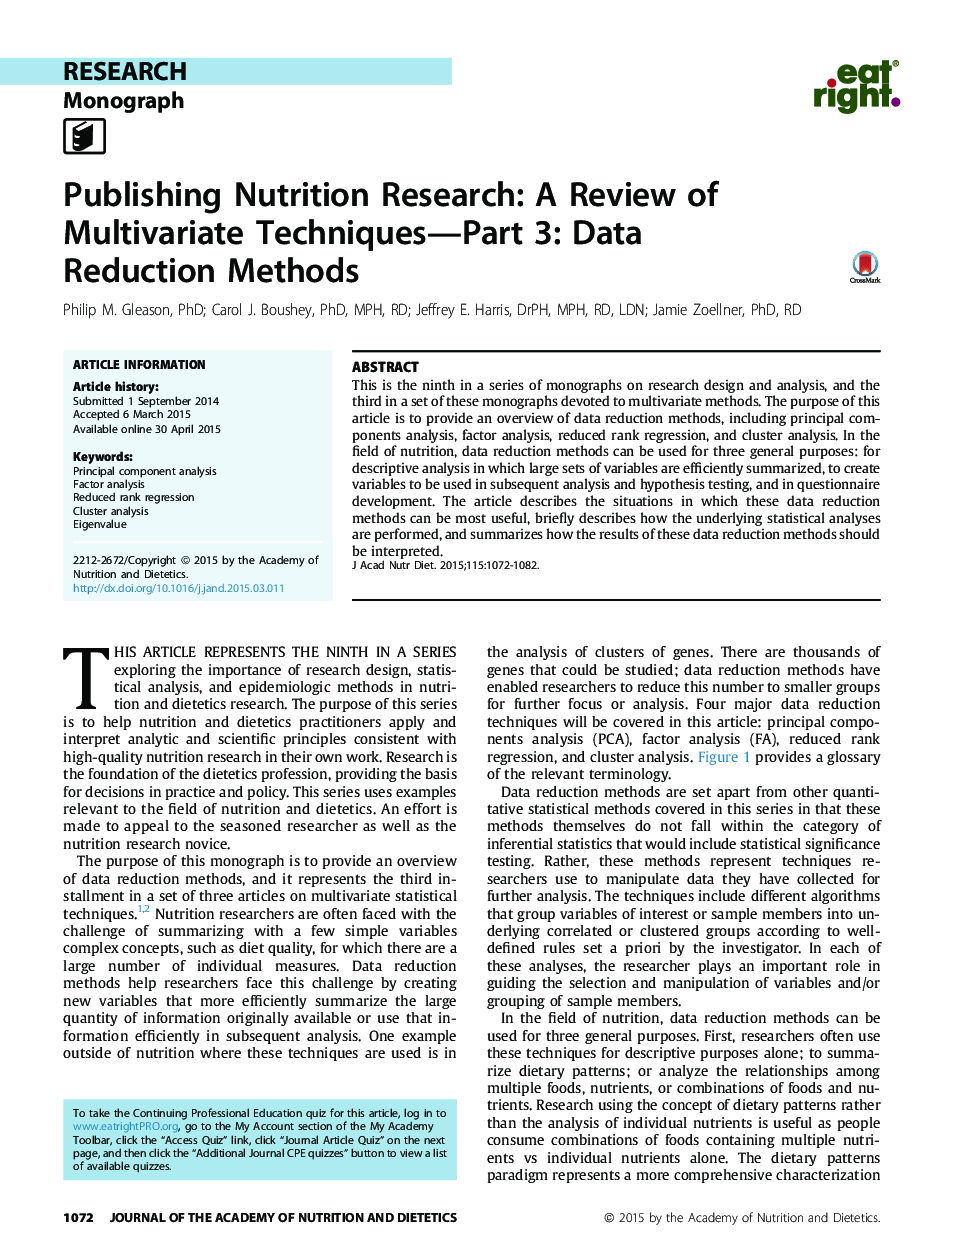 Publishing Nutrition Research: A Review of Multivariate Techniques—Part 3: Data Reduction Methods 